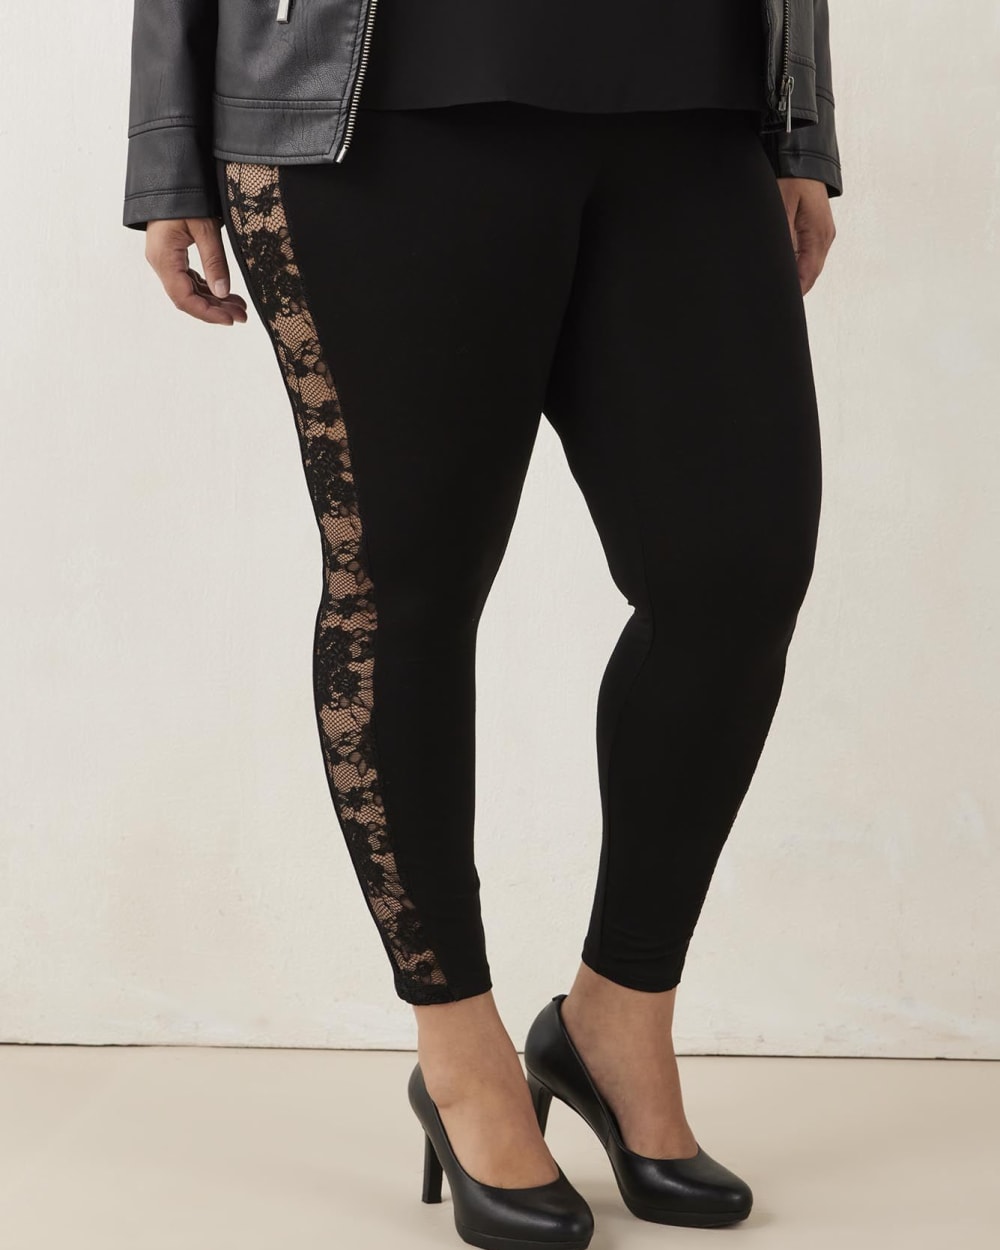 Responsible, Fashion Leggings with Lace Inserts - PENN. Essentials